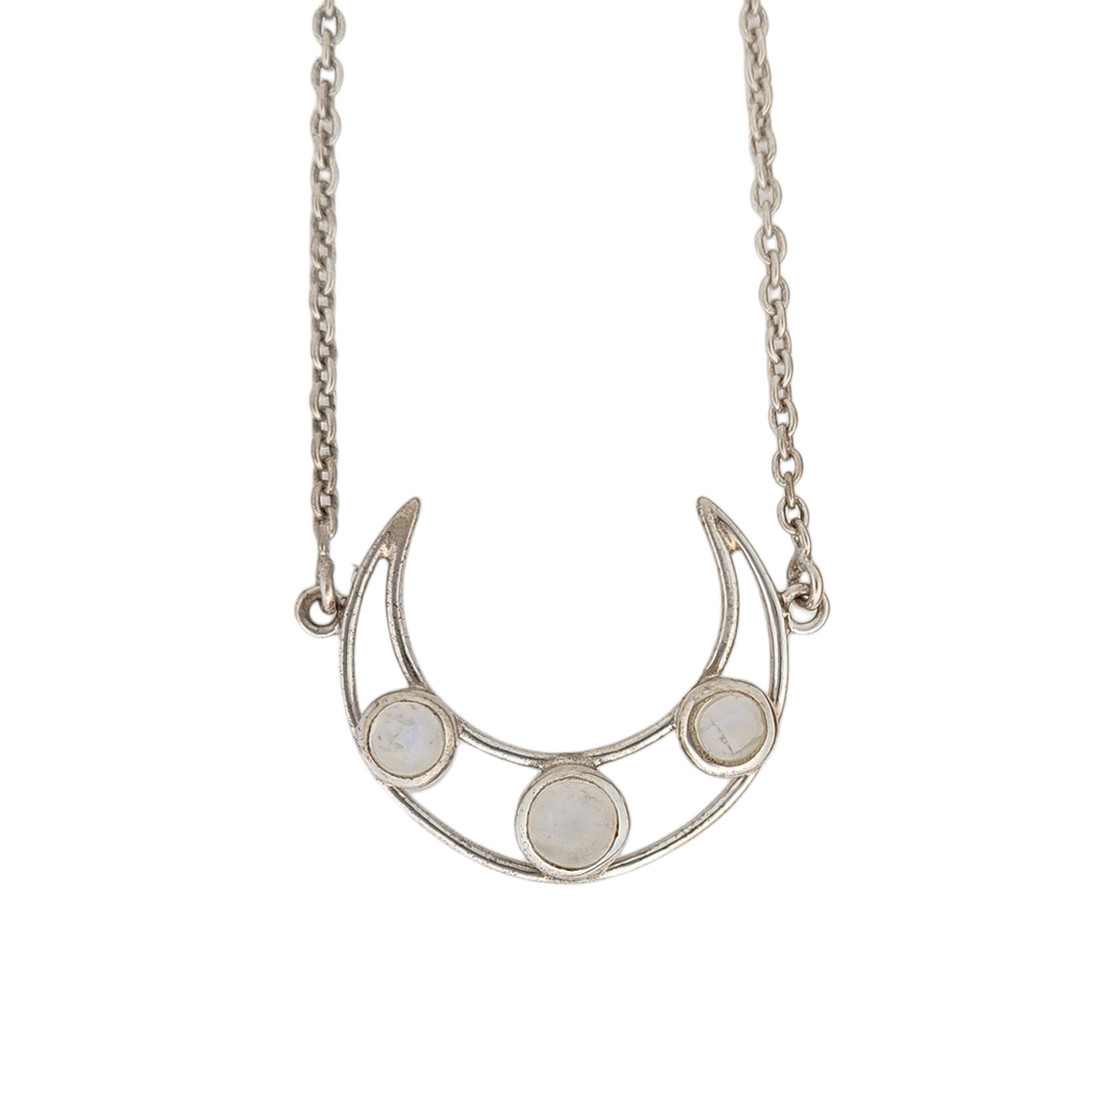 Moonstone moon sterling silver necklace. 